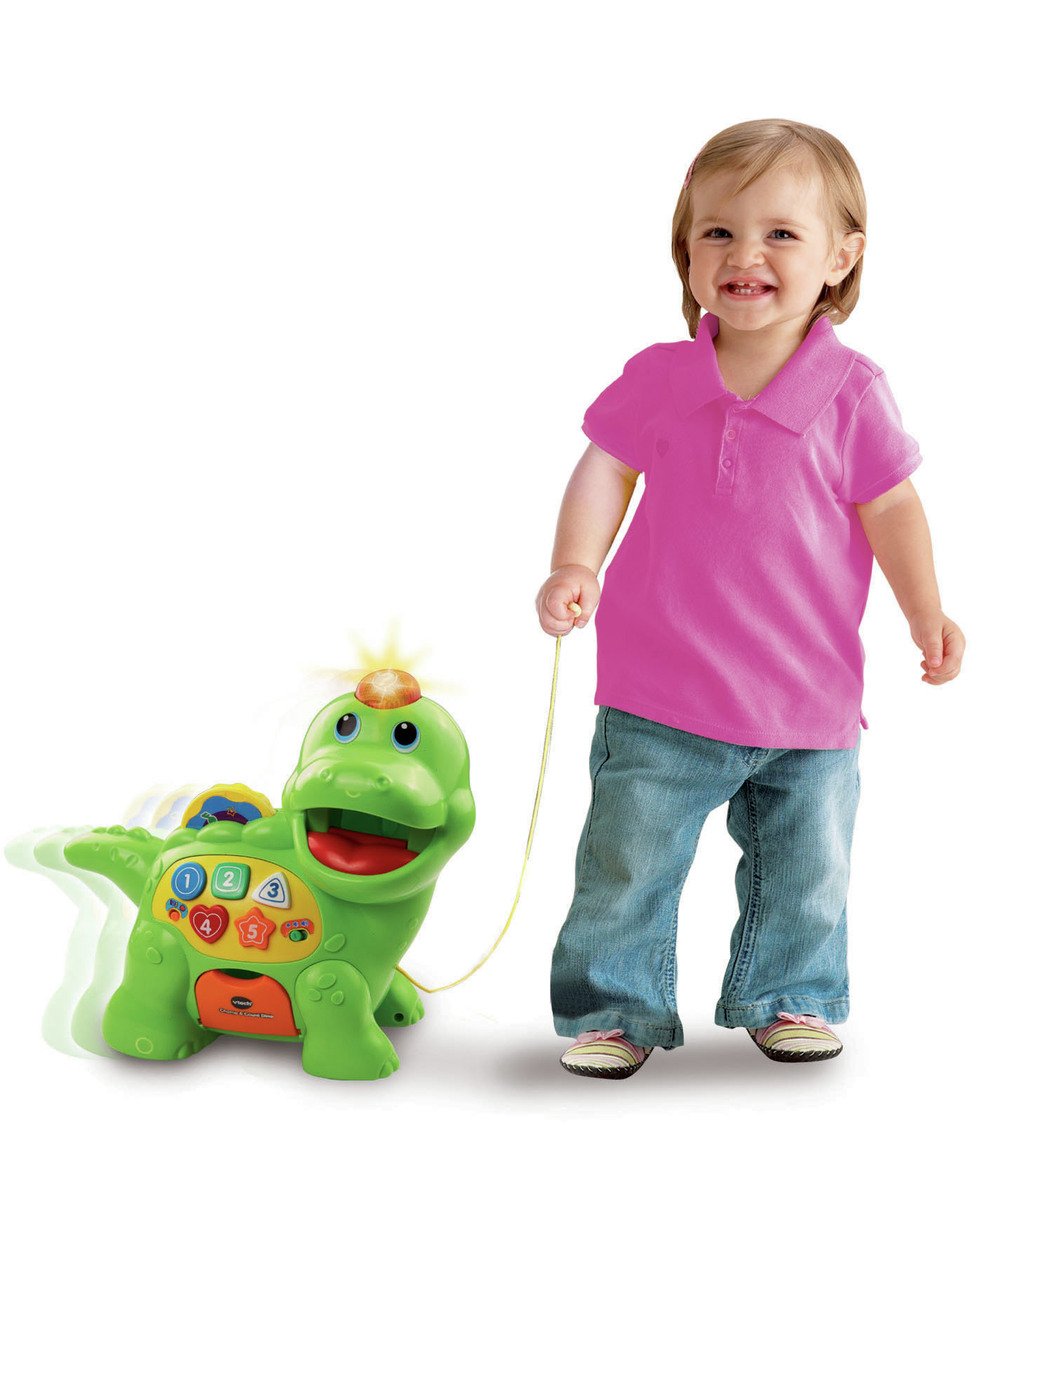 VTech Feed Me Dino Activity Toy Review